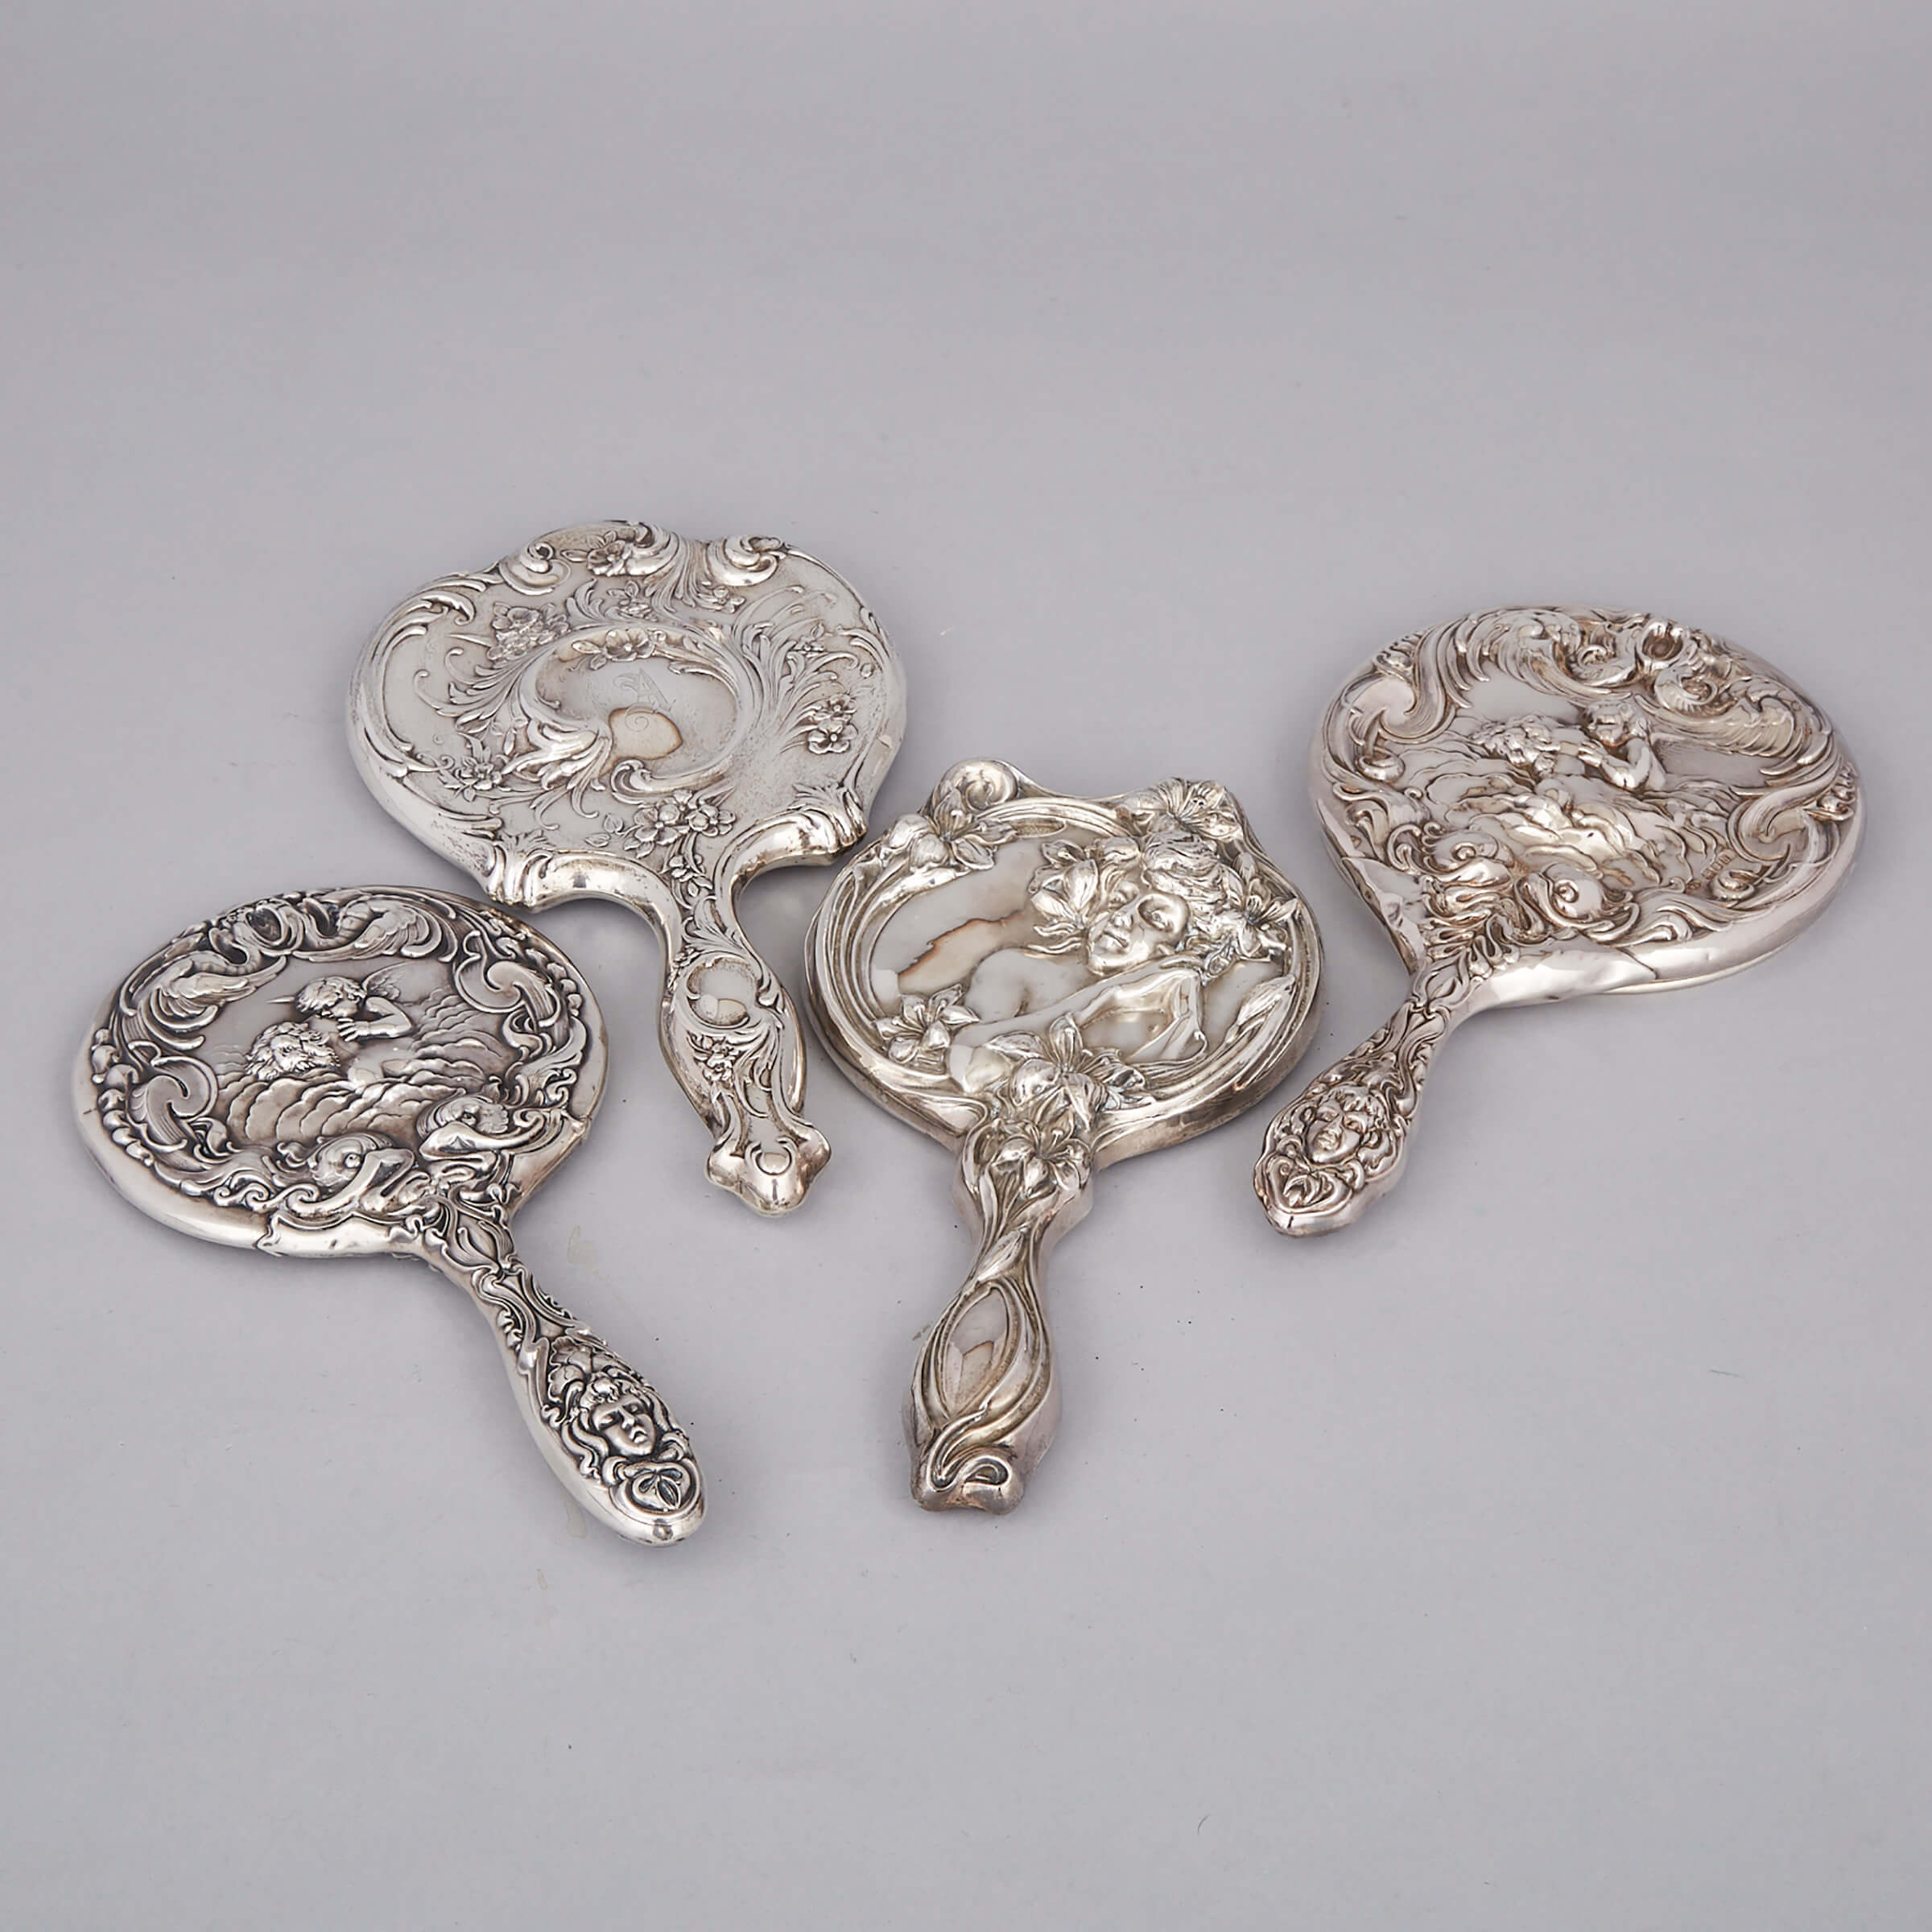 Four Edwardian and North American Silver Hand Mirrors, c.1900-10